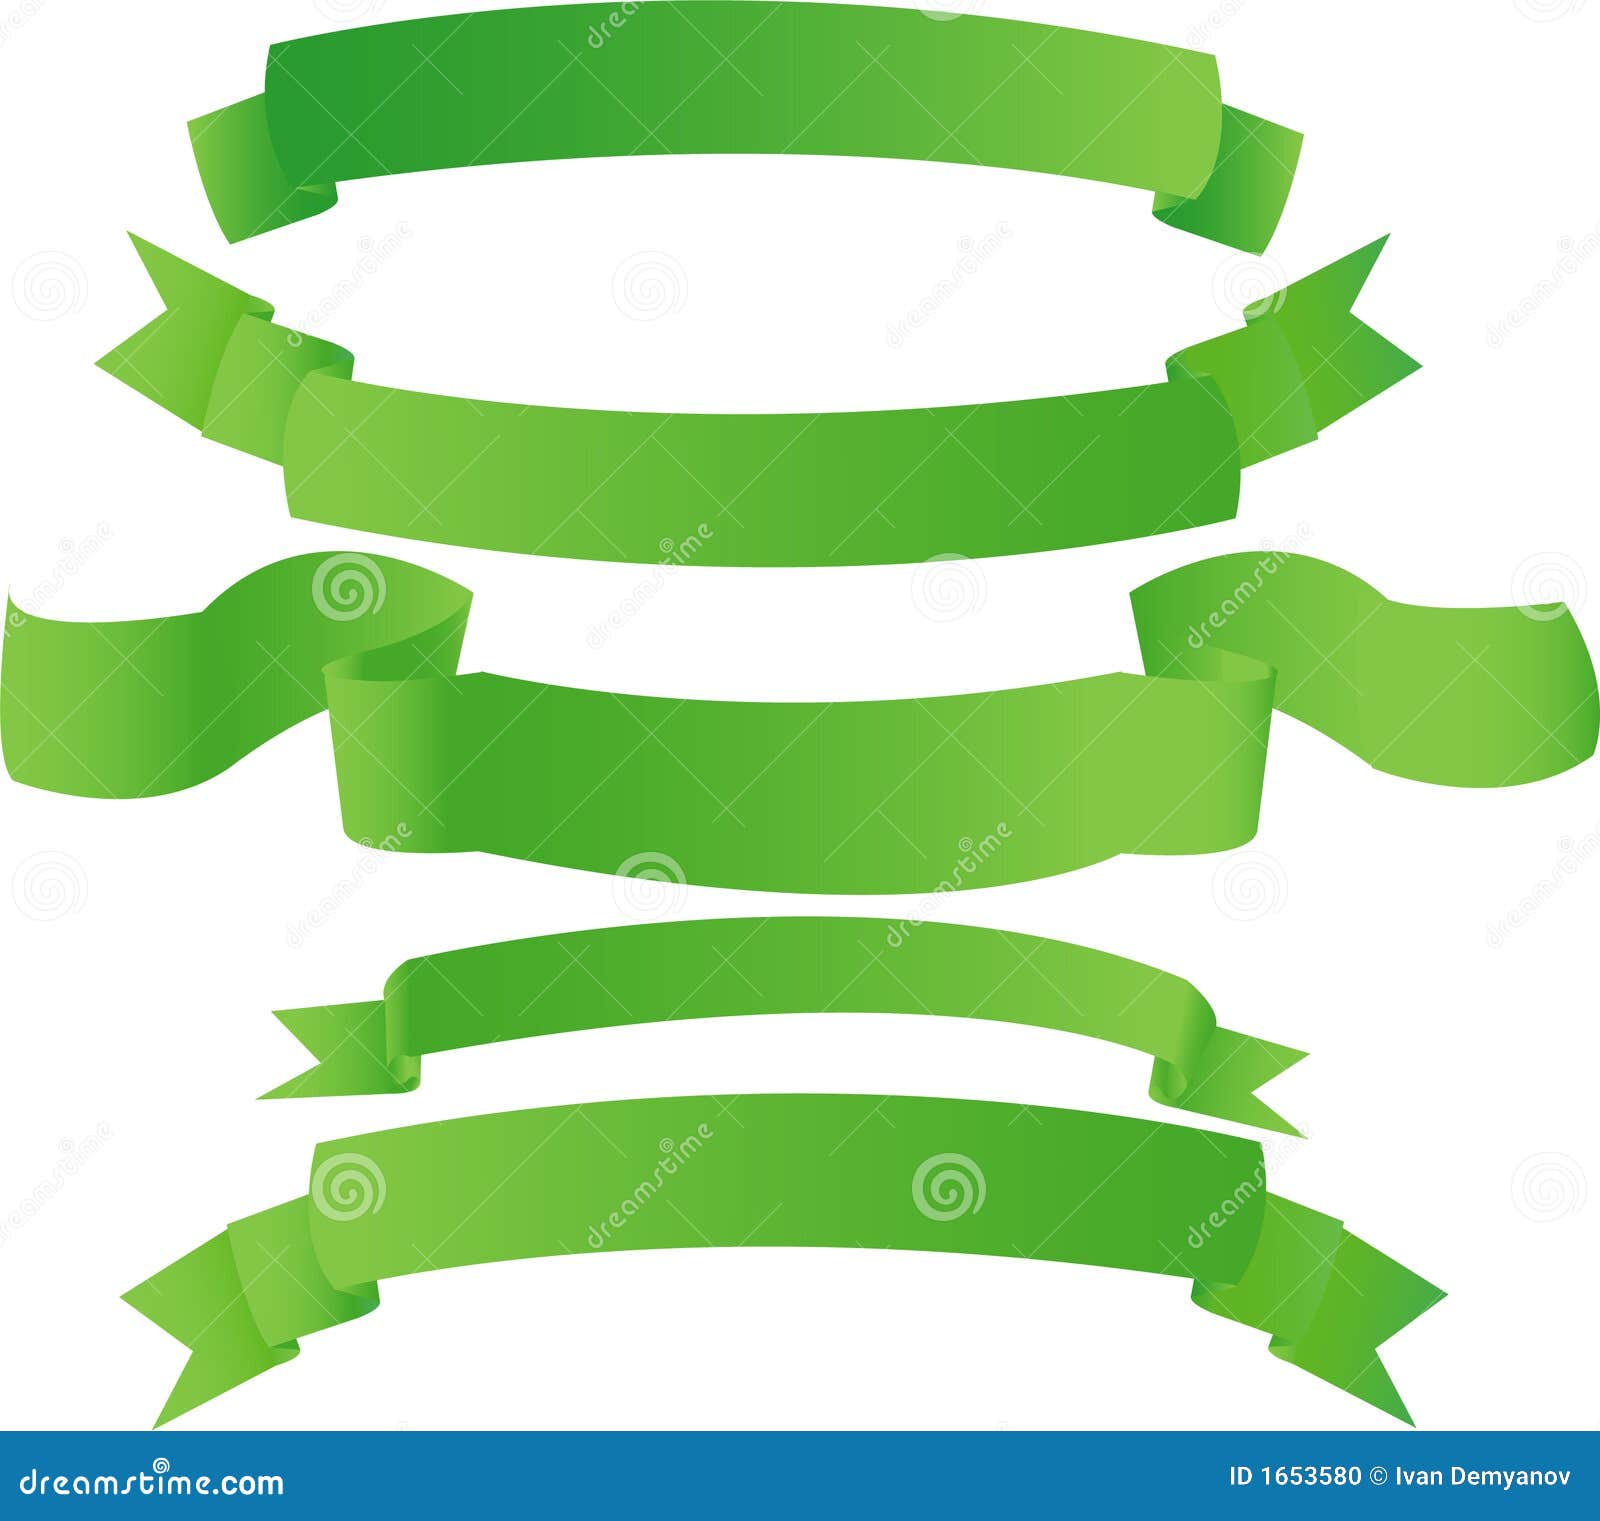 Green Banners Stock Photo - Image: 1653580